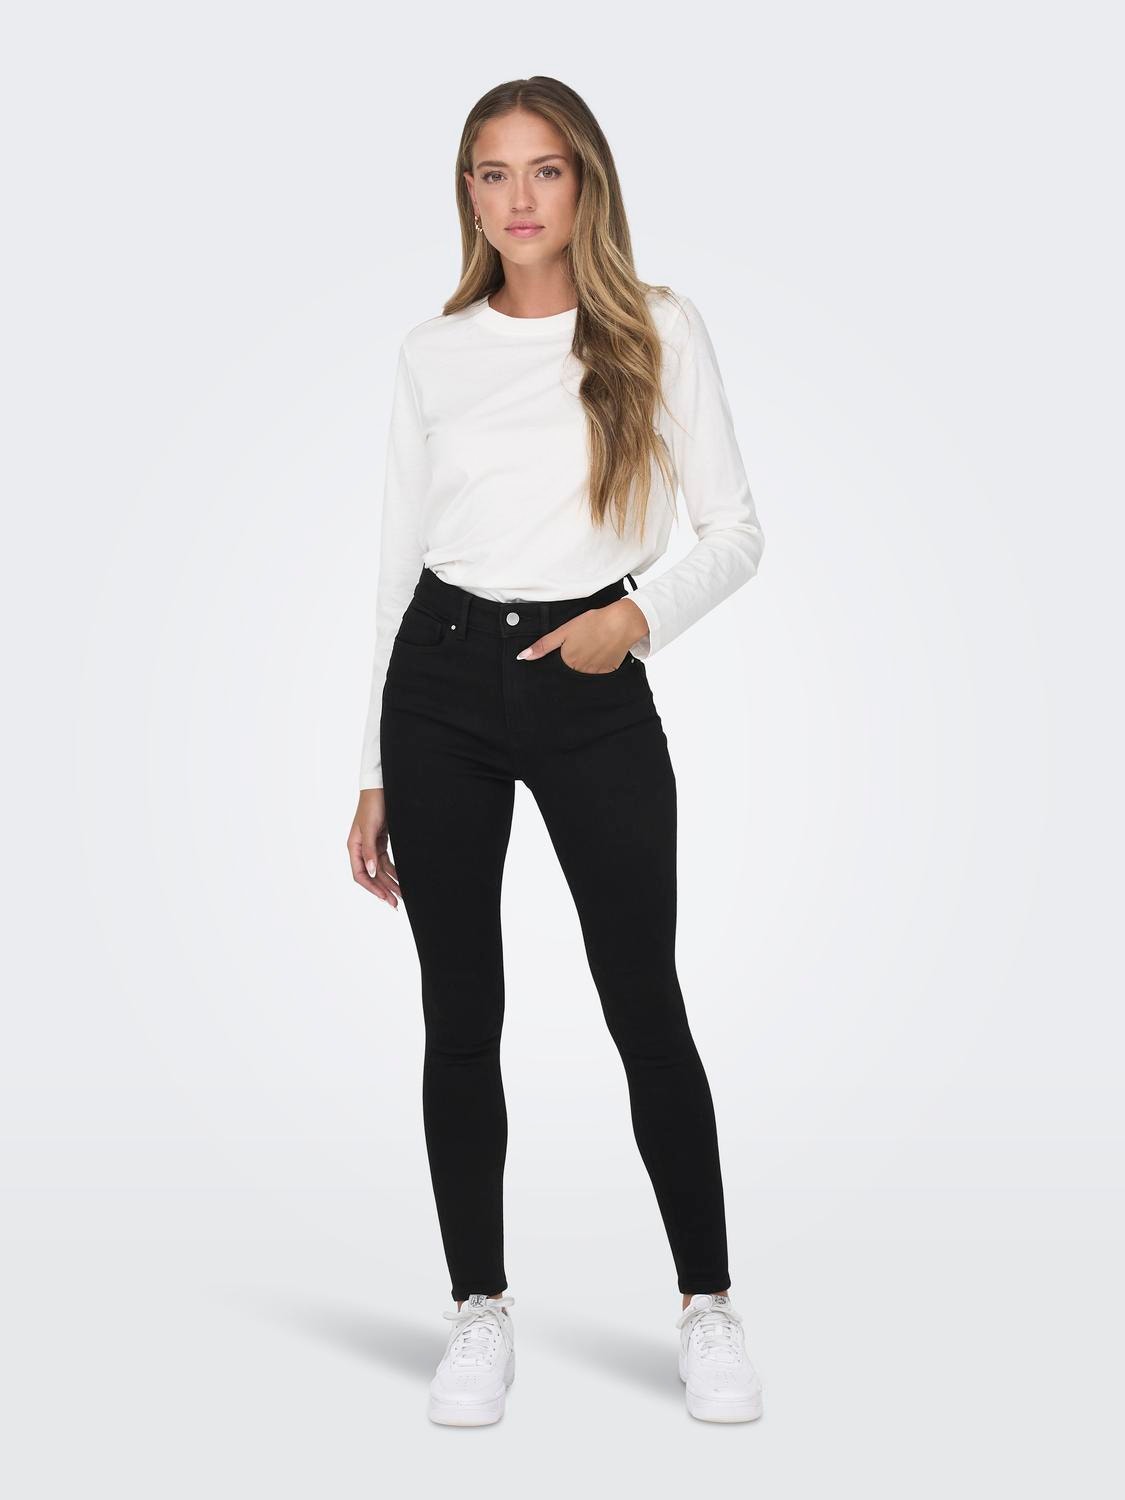 ONLY Skinny Fit High waist Jeans -Black - 15249386